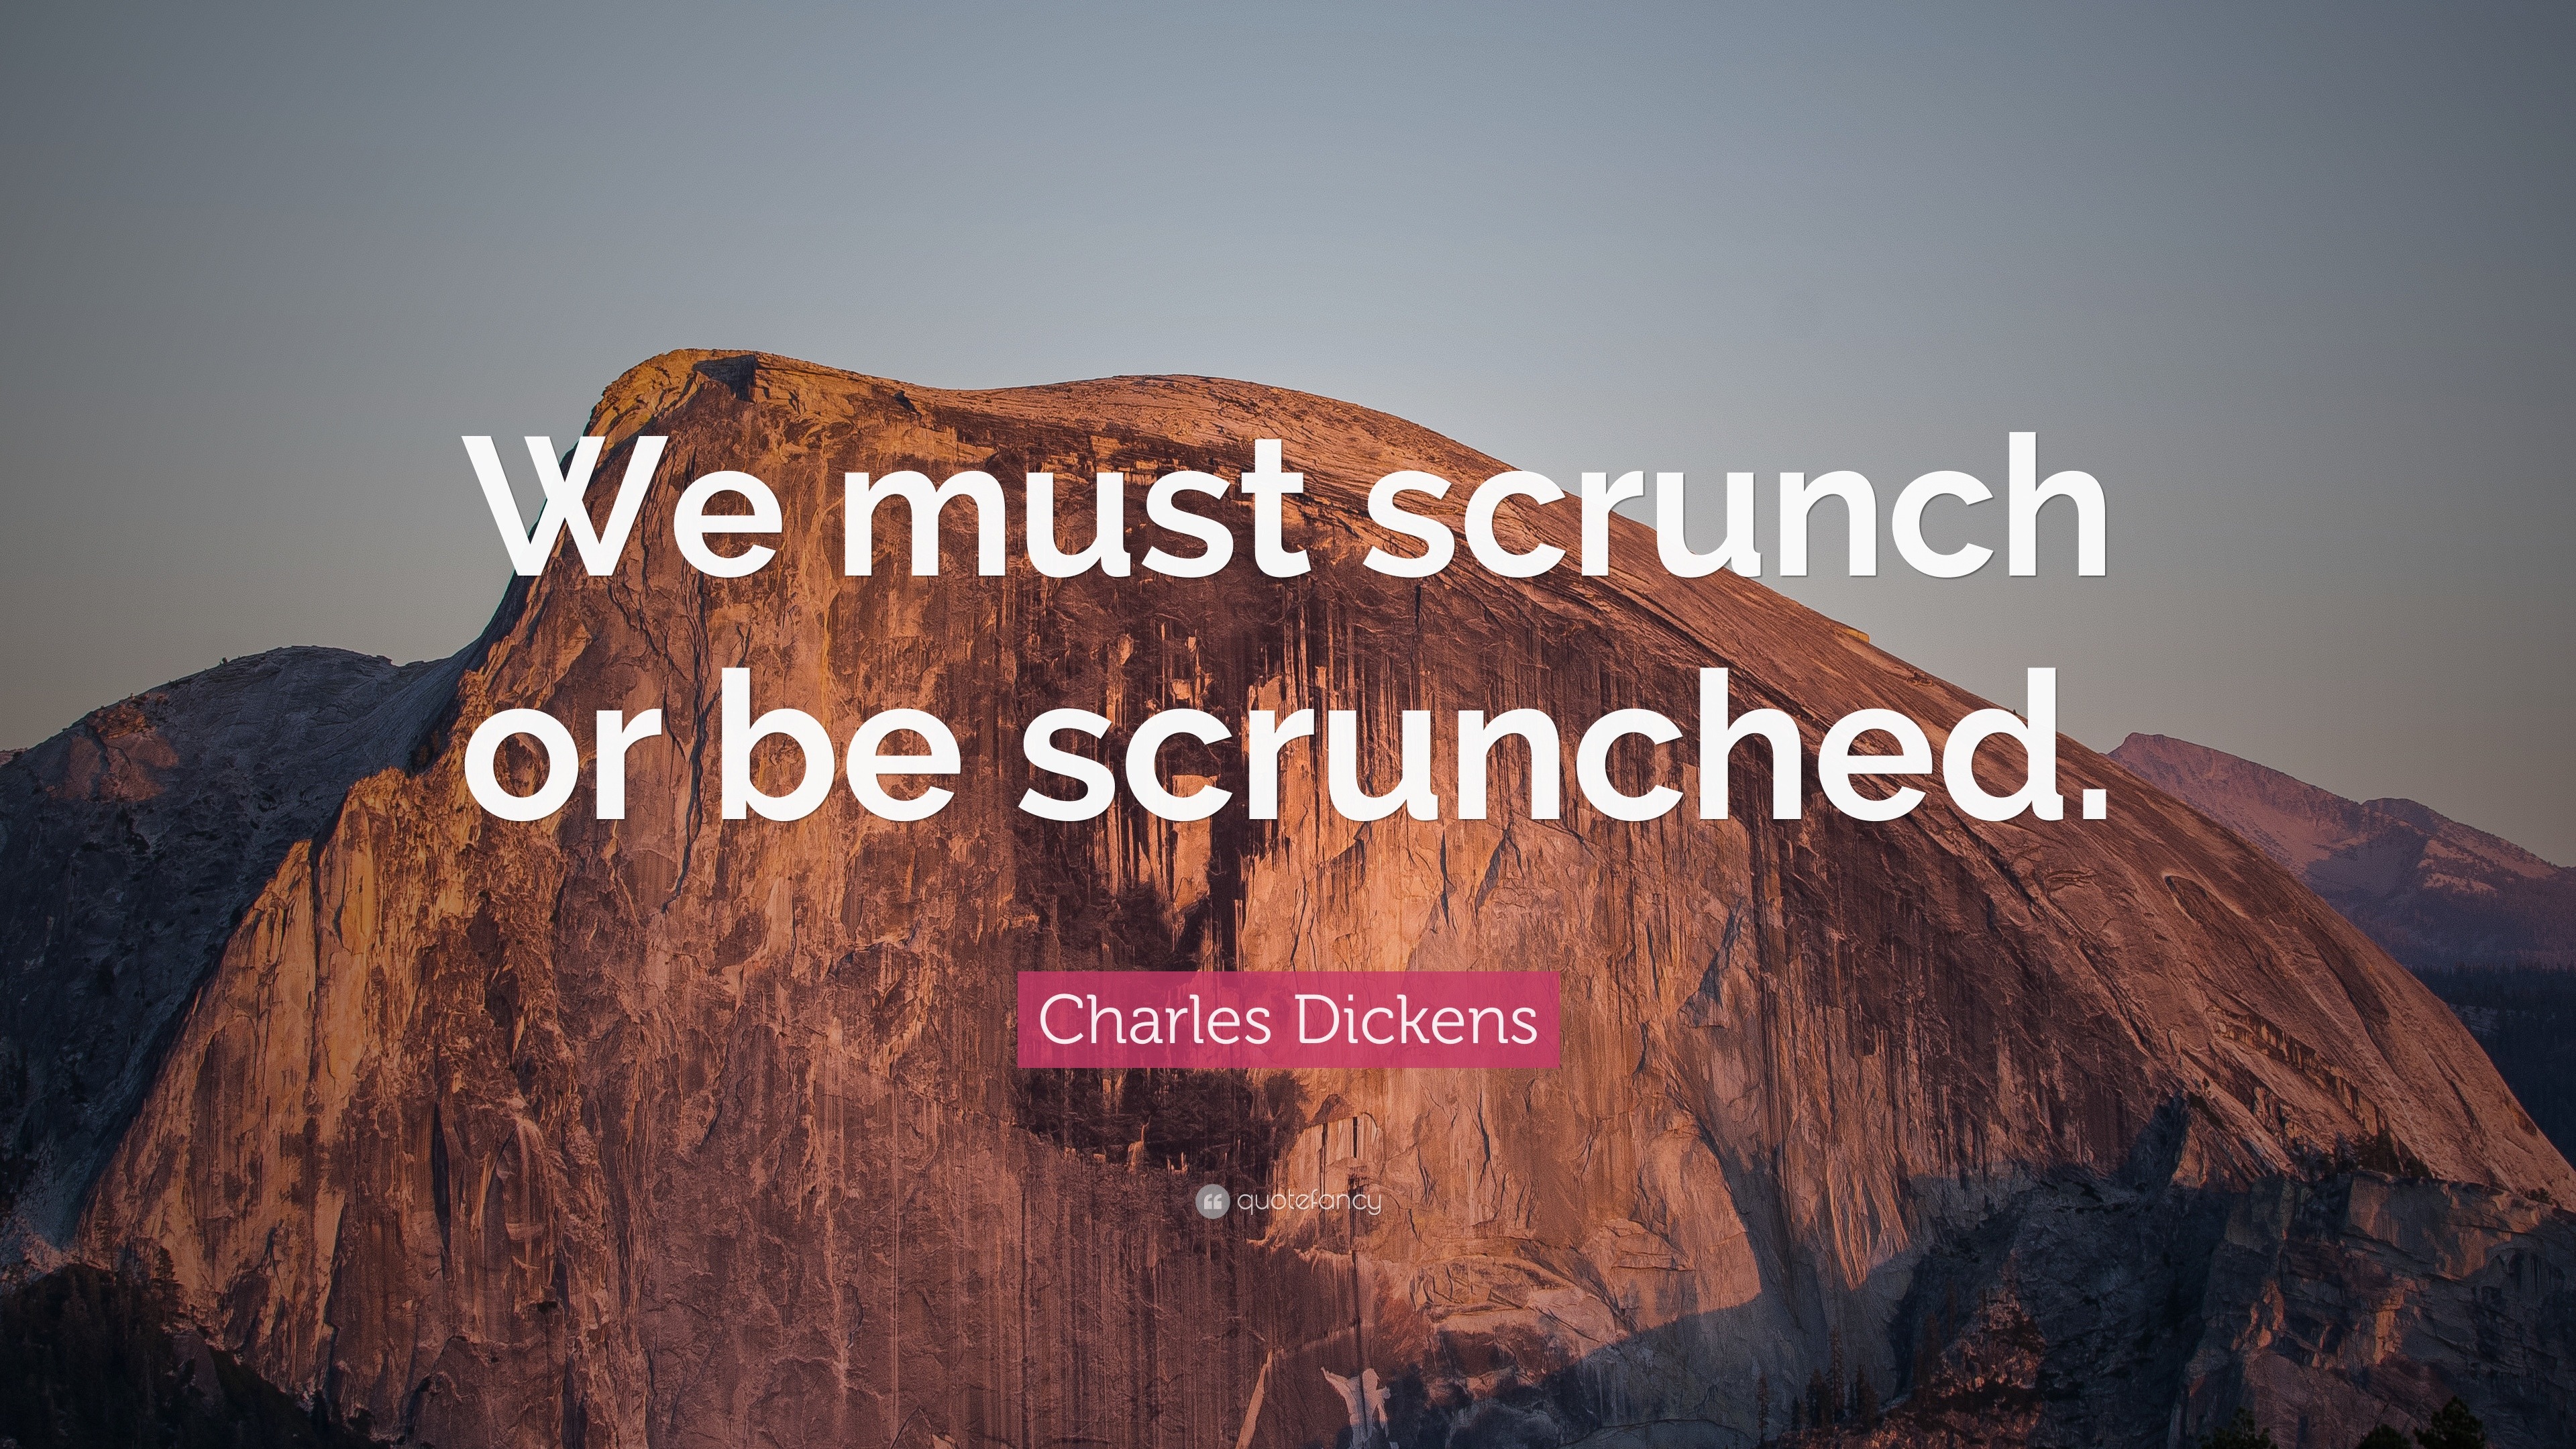 Charles Dickens Quote: “We must scrunch or be scrunched.”